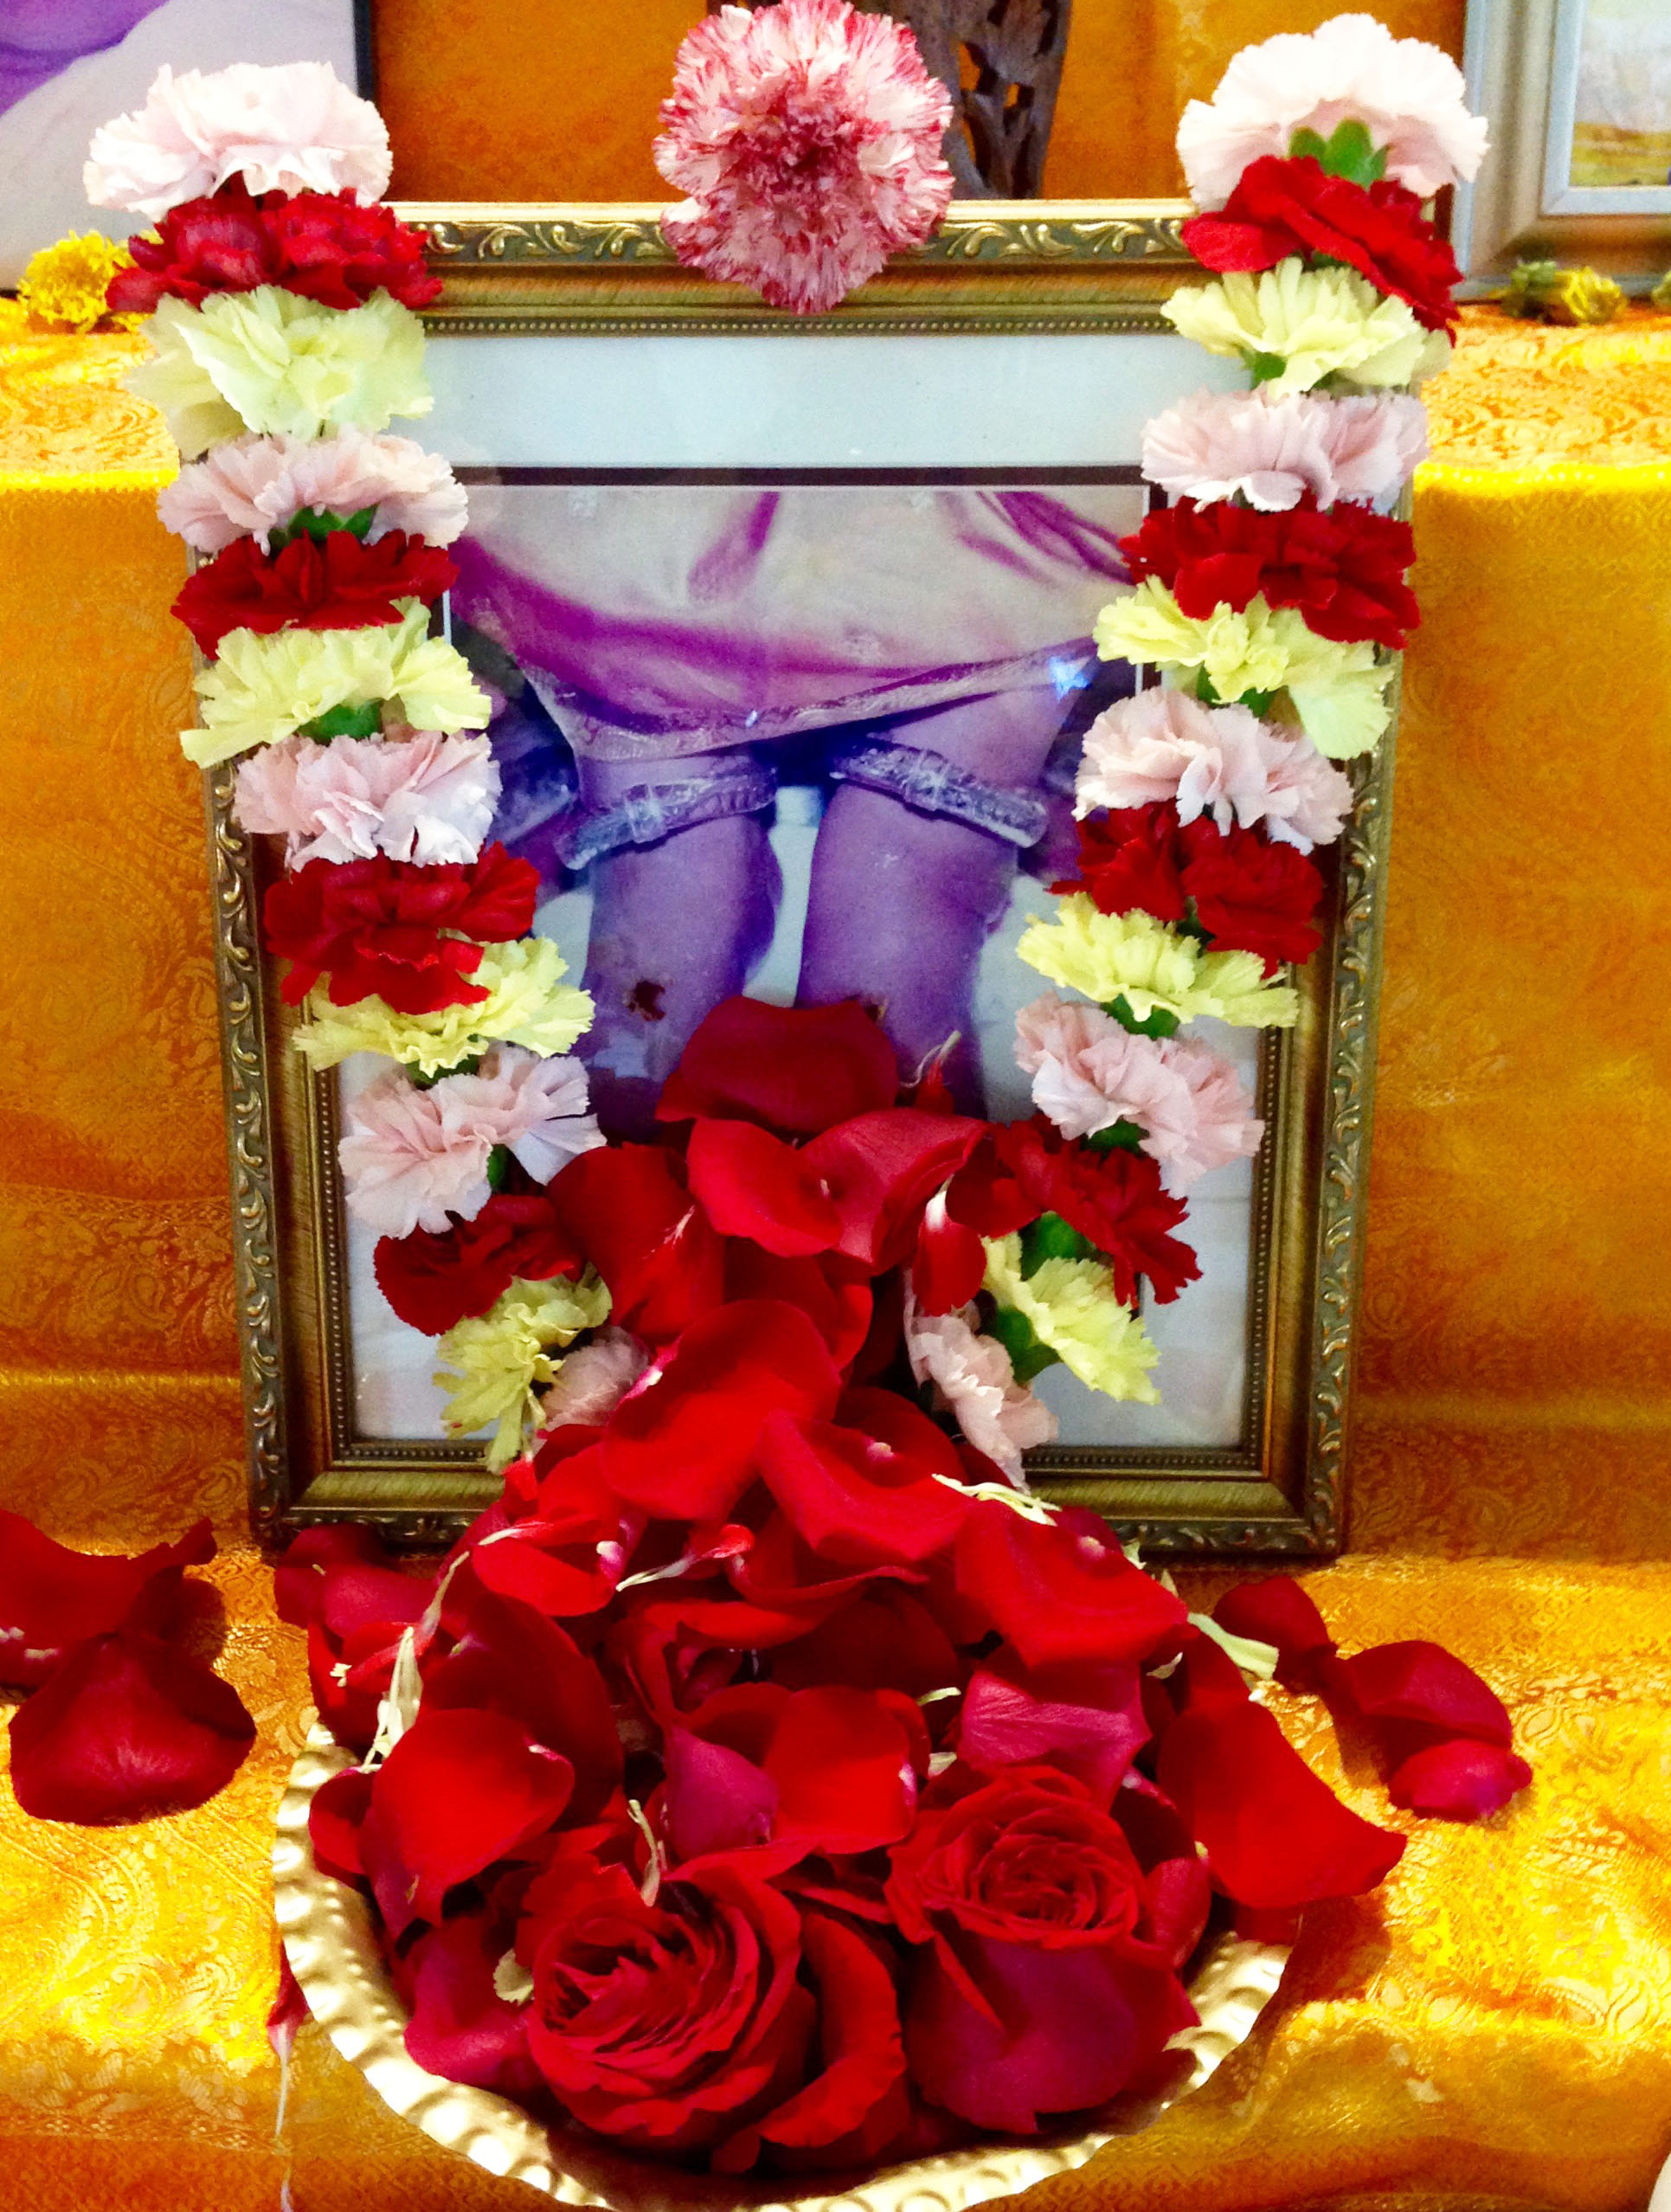 Amma's feet covered in red rose petals